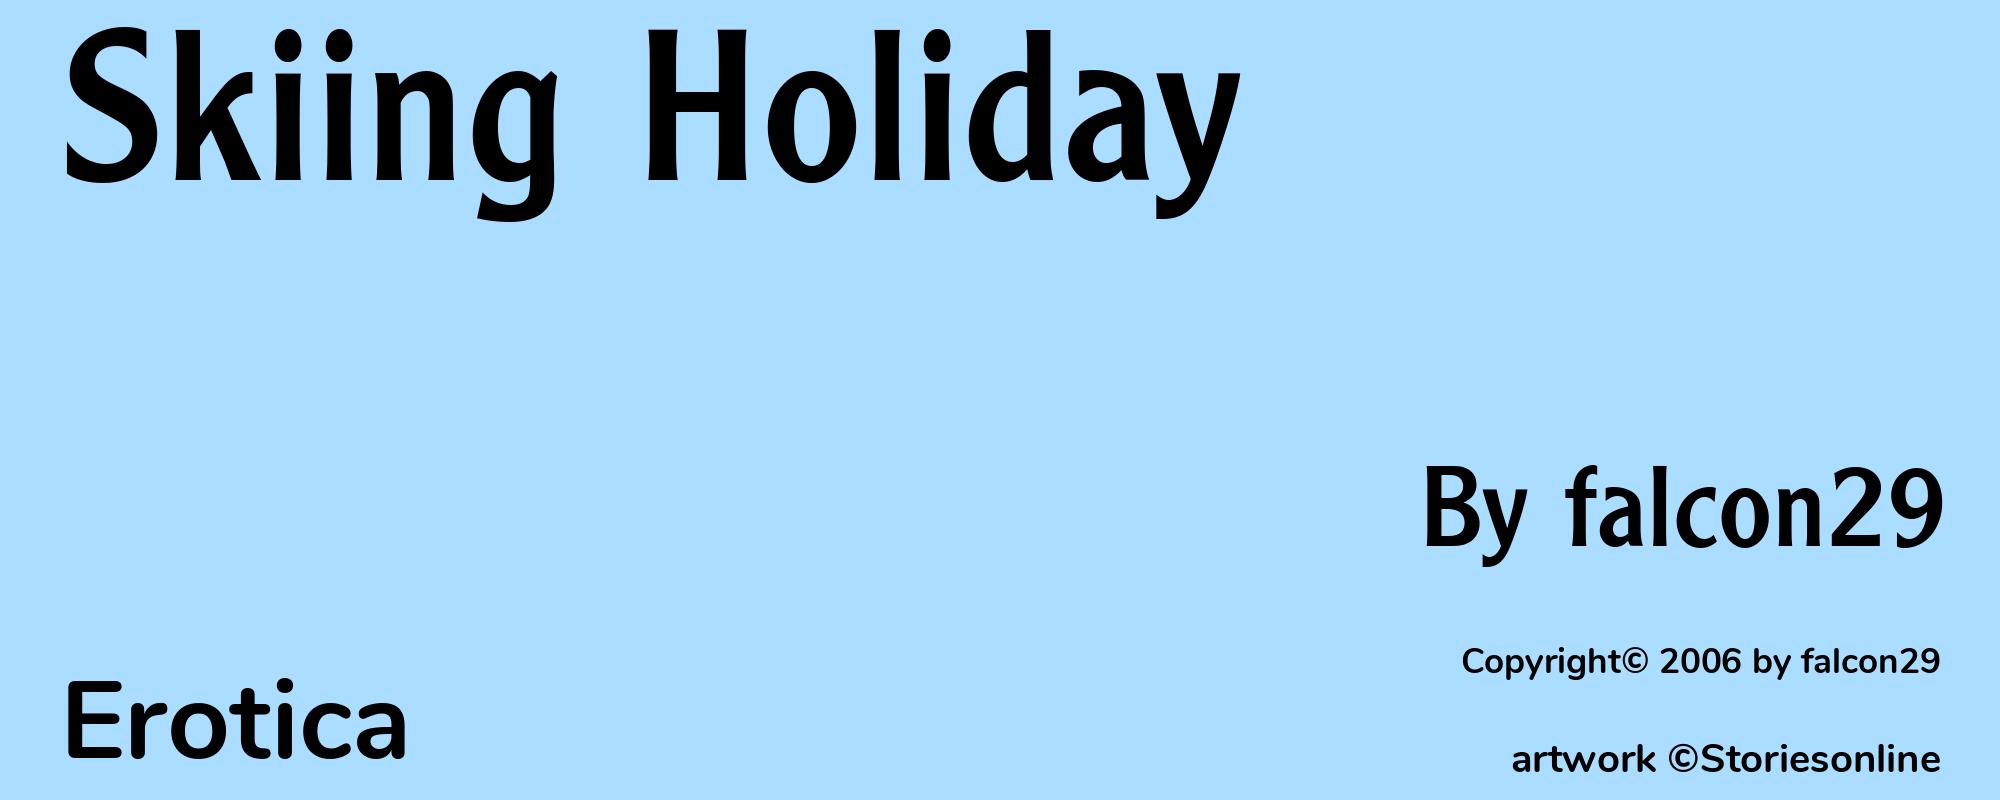 Skiing Holiday - Cover